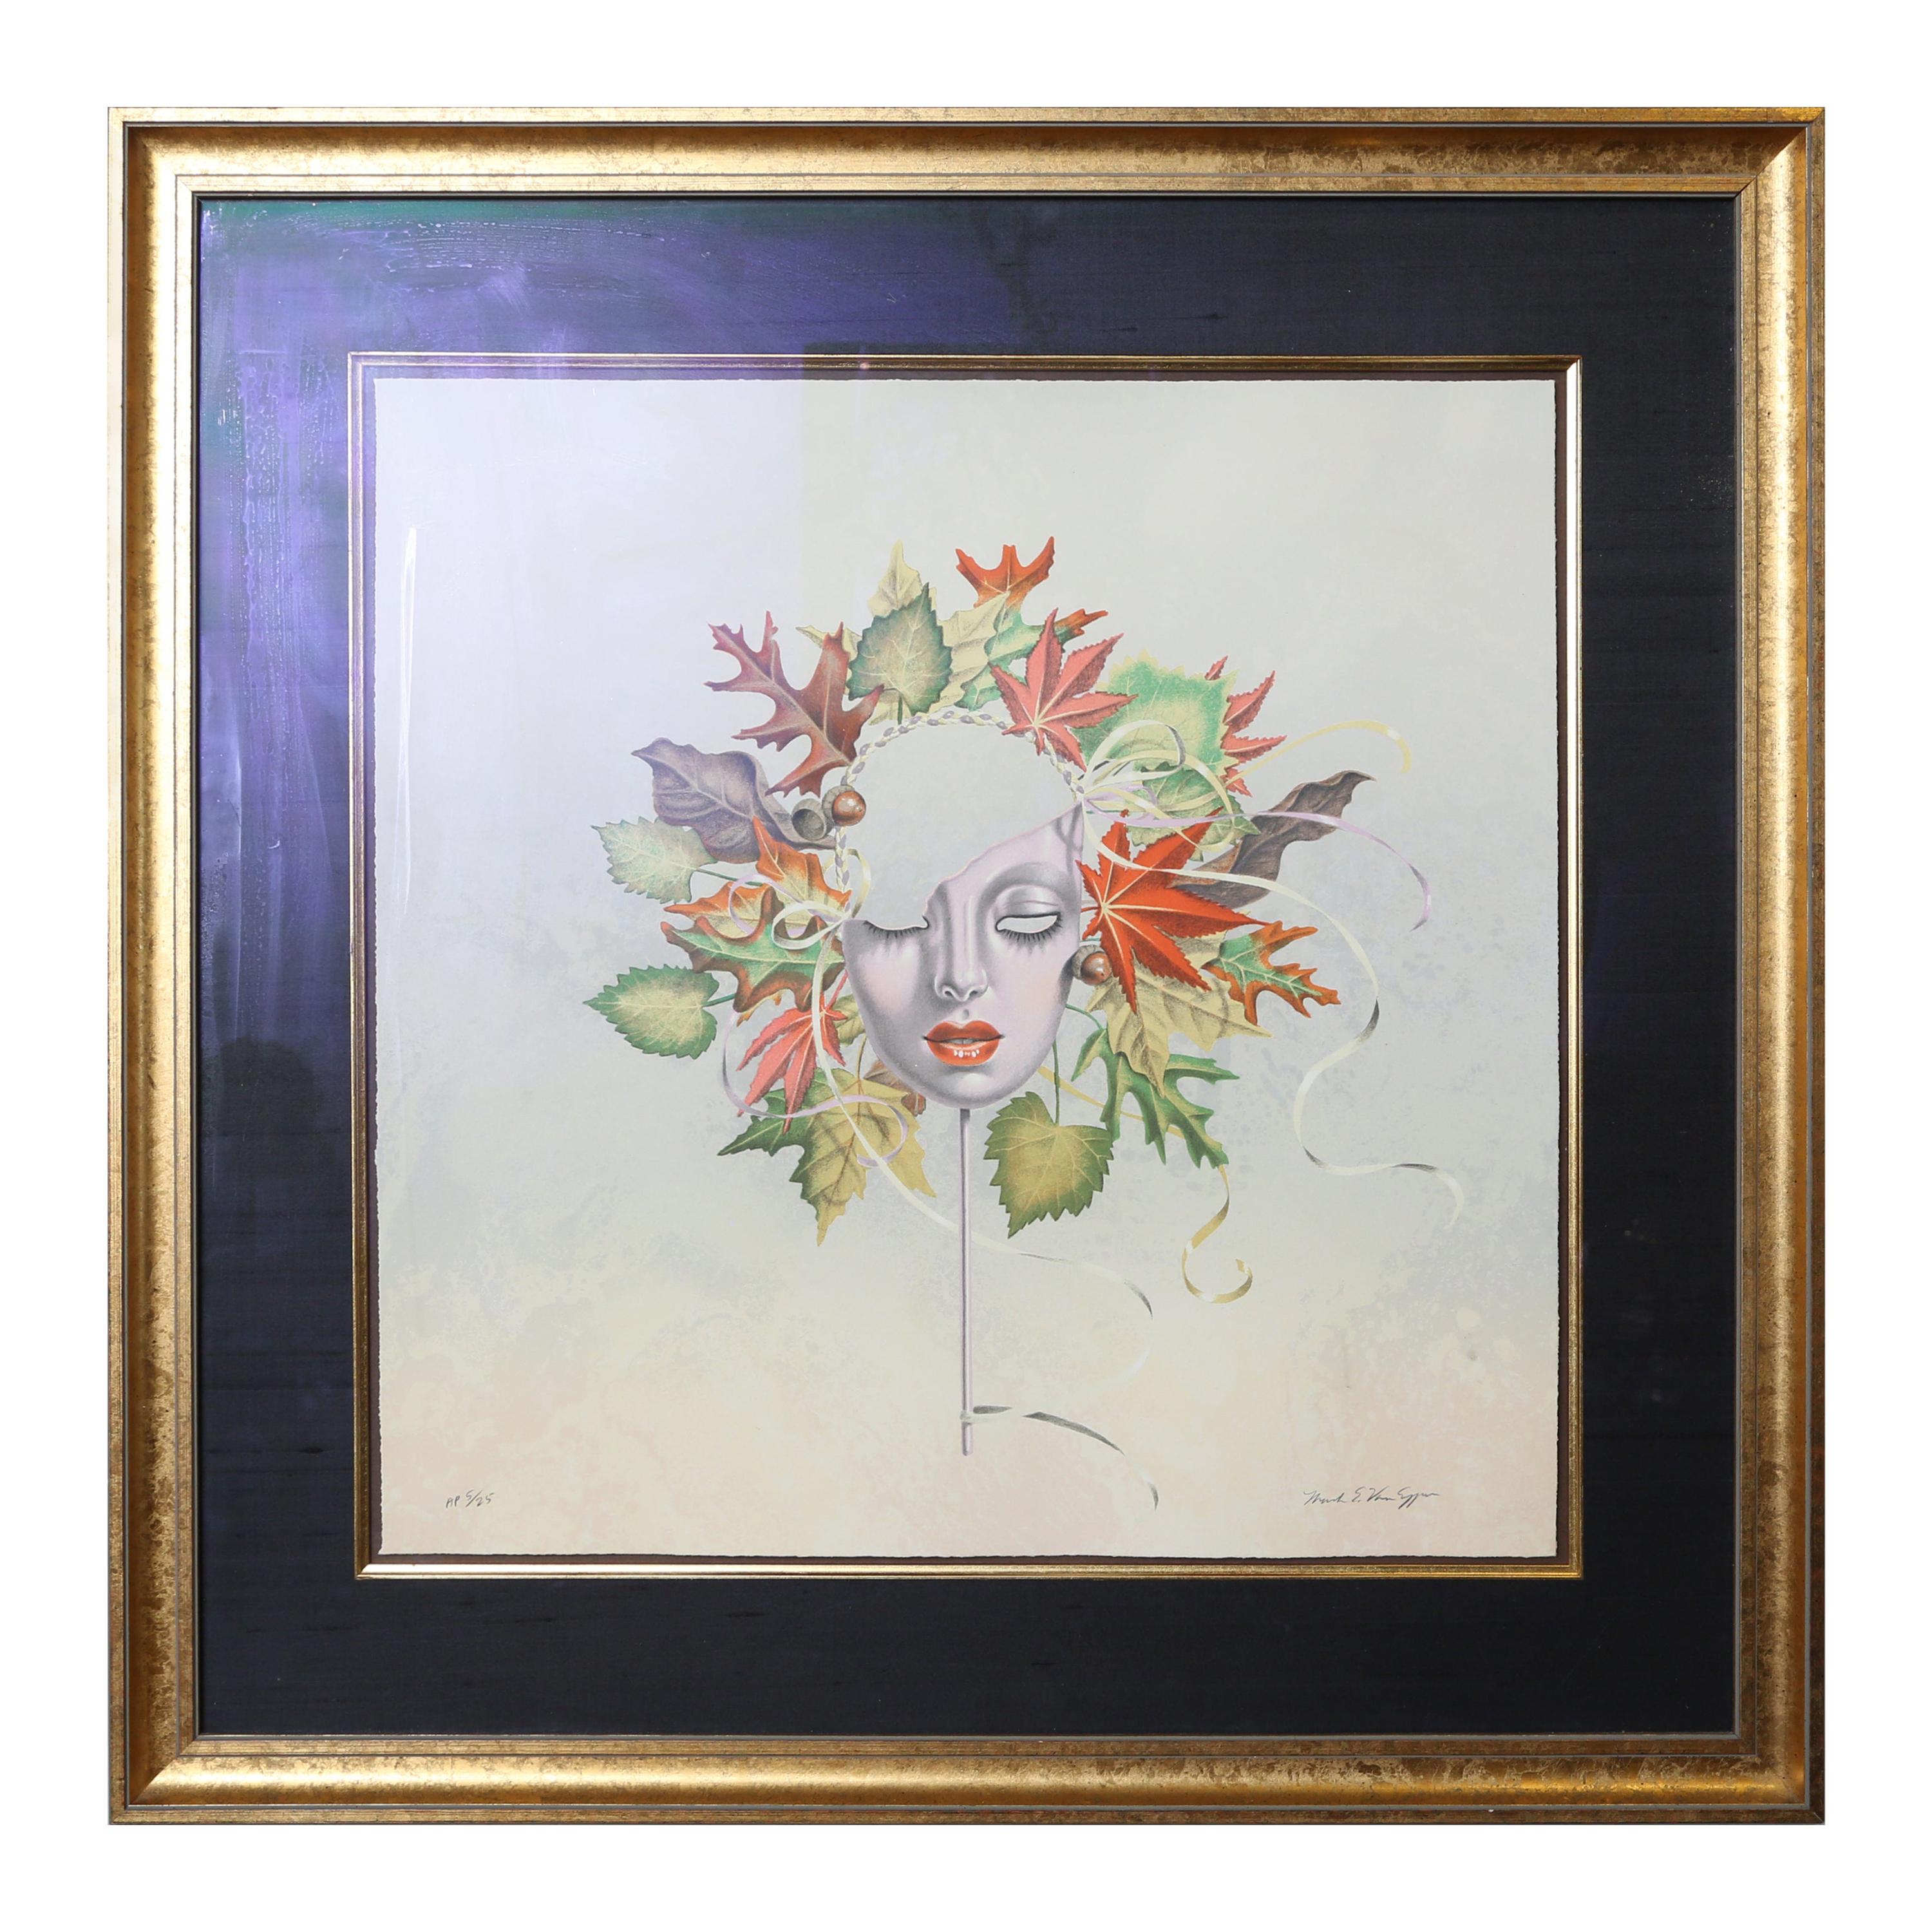 Set of four limited edition lithographs of the four seasons by Mark Van Epps.
All signed AP 5/25.